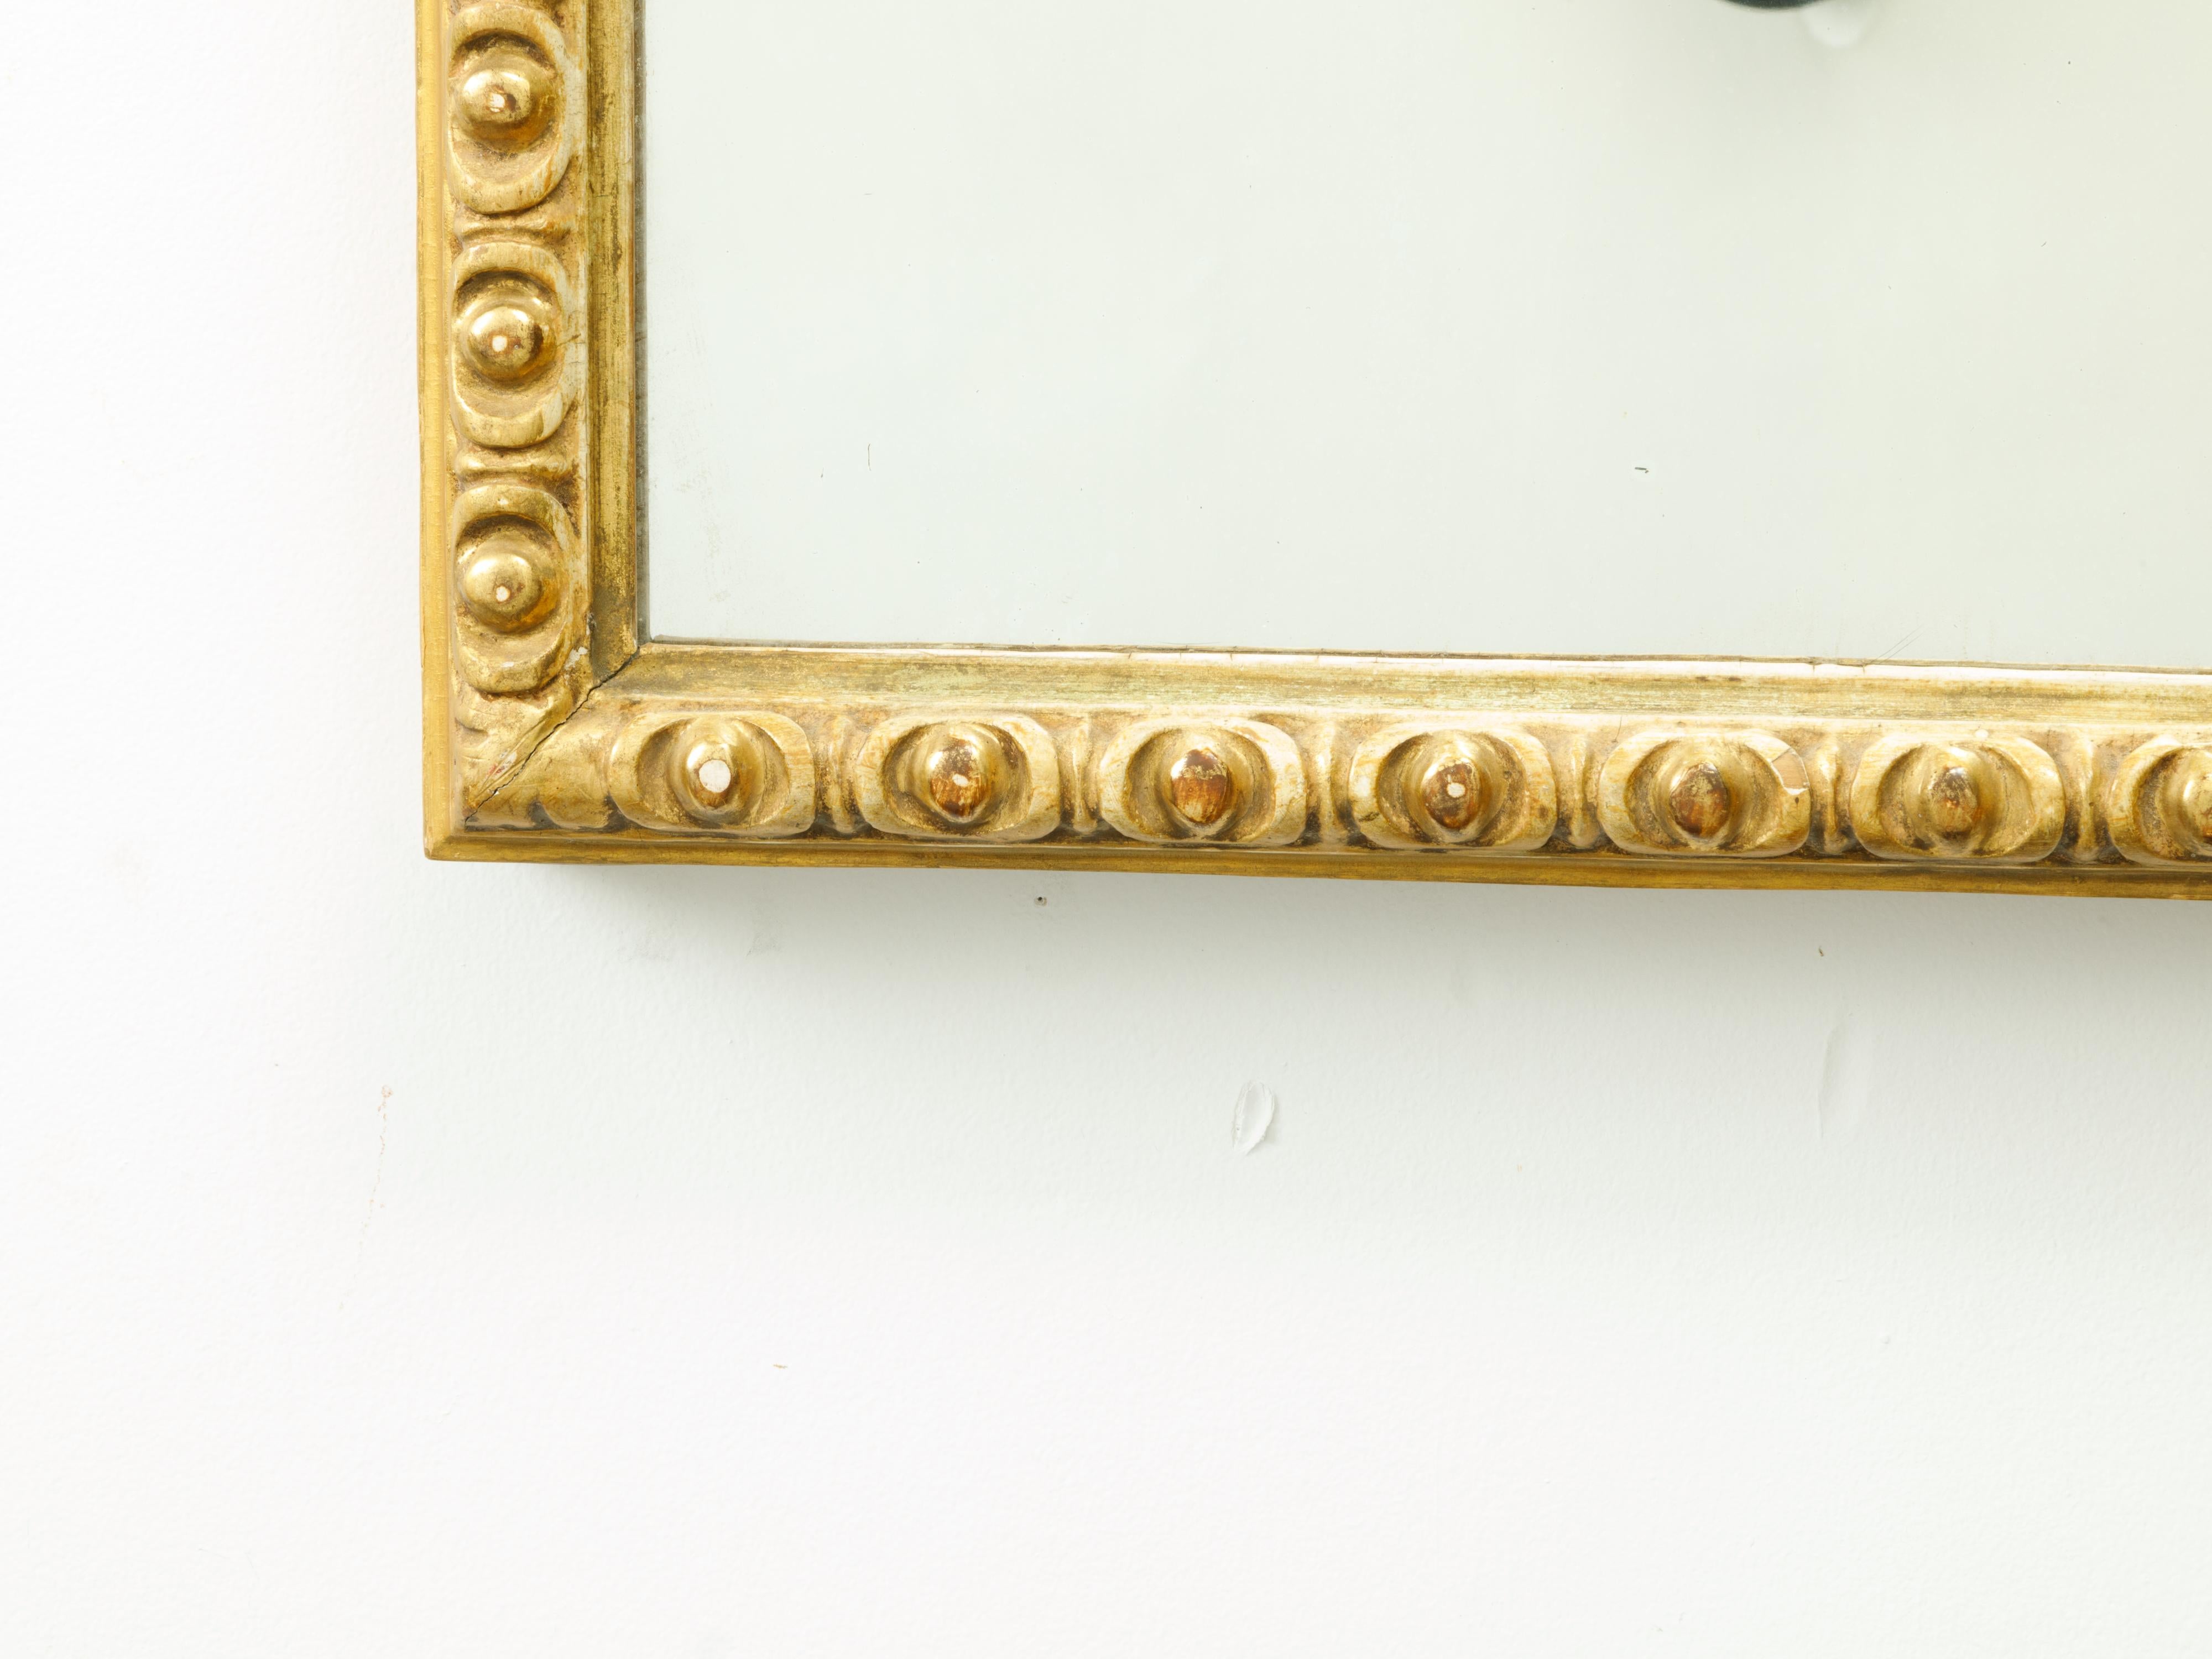 A French giltwood rectangular mirror from the mid-20th century, with carved ovoid motifs. Created in France during the midcentury period, this rectangular mirror features a carved giltwood frame adorned with a regular rhythm of ovoid motifs